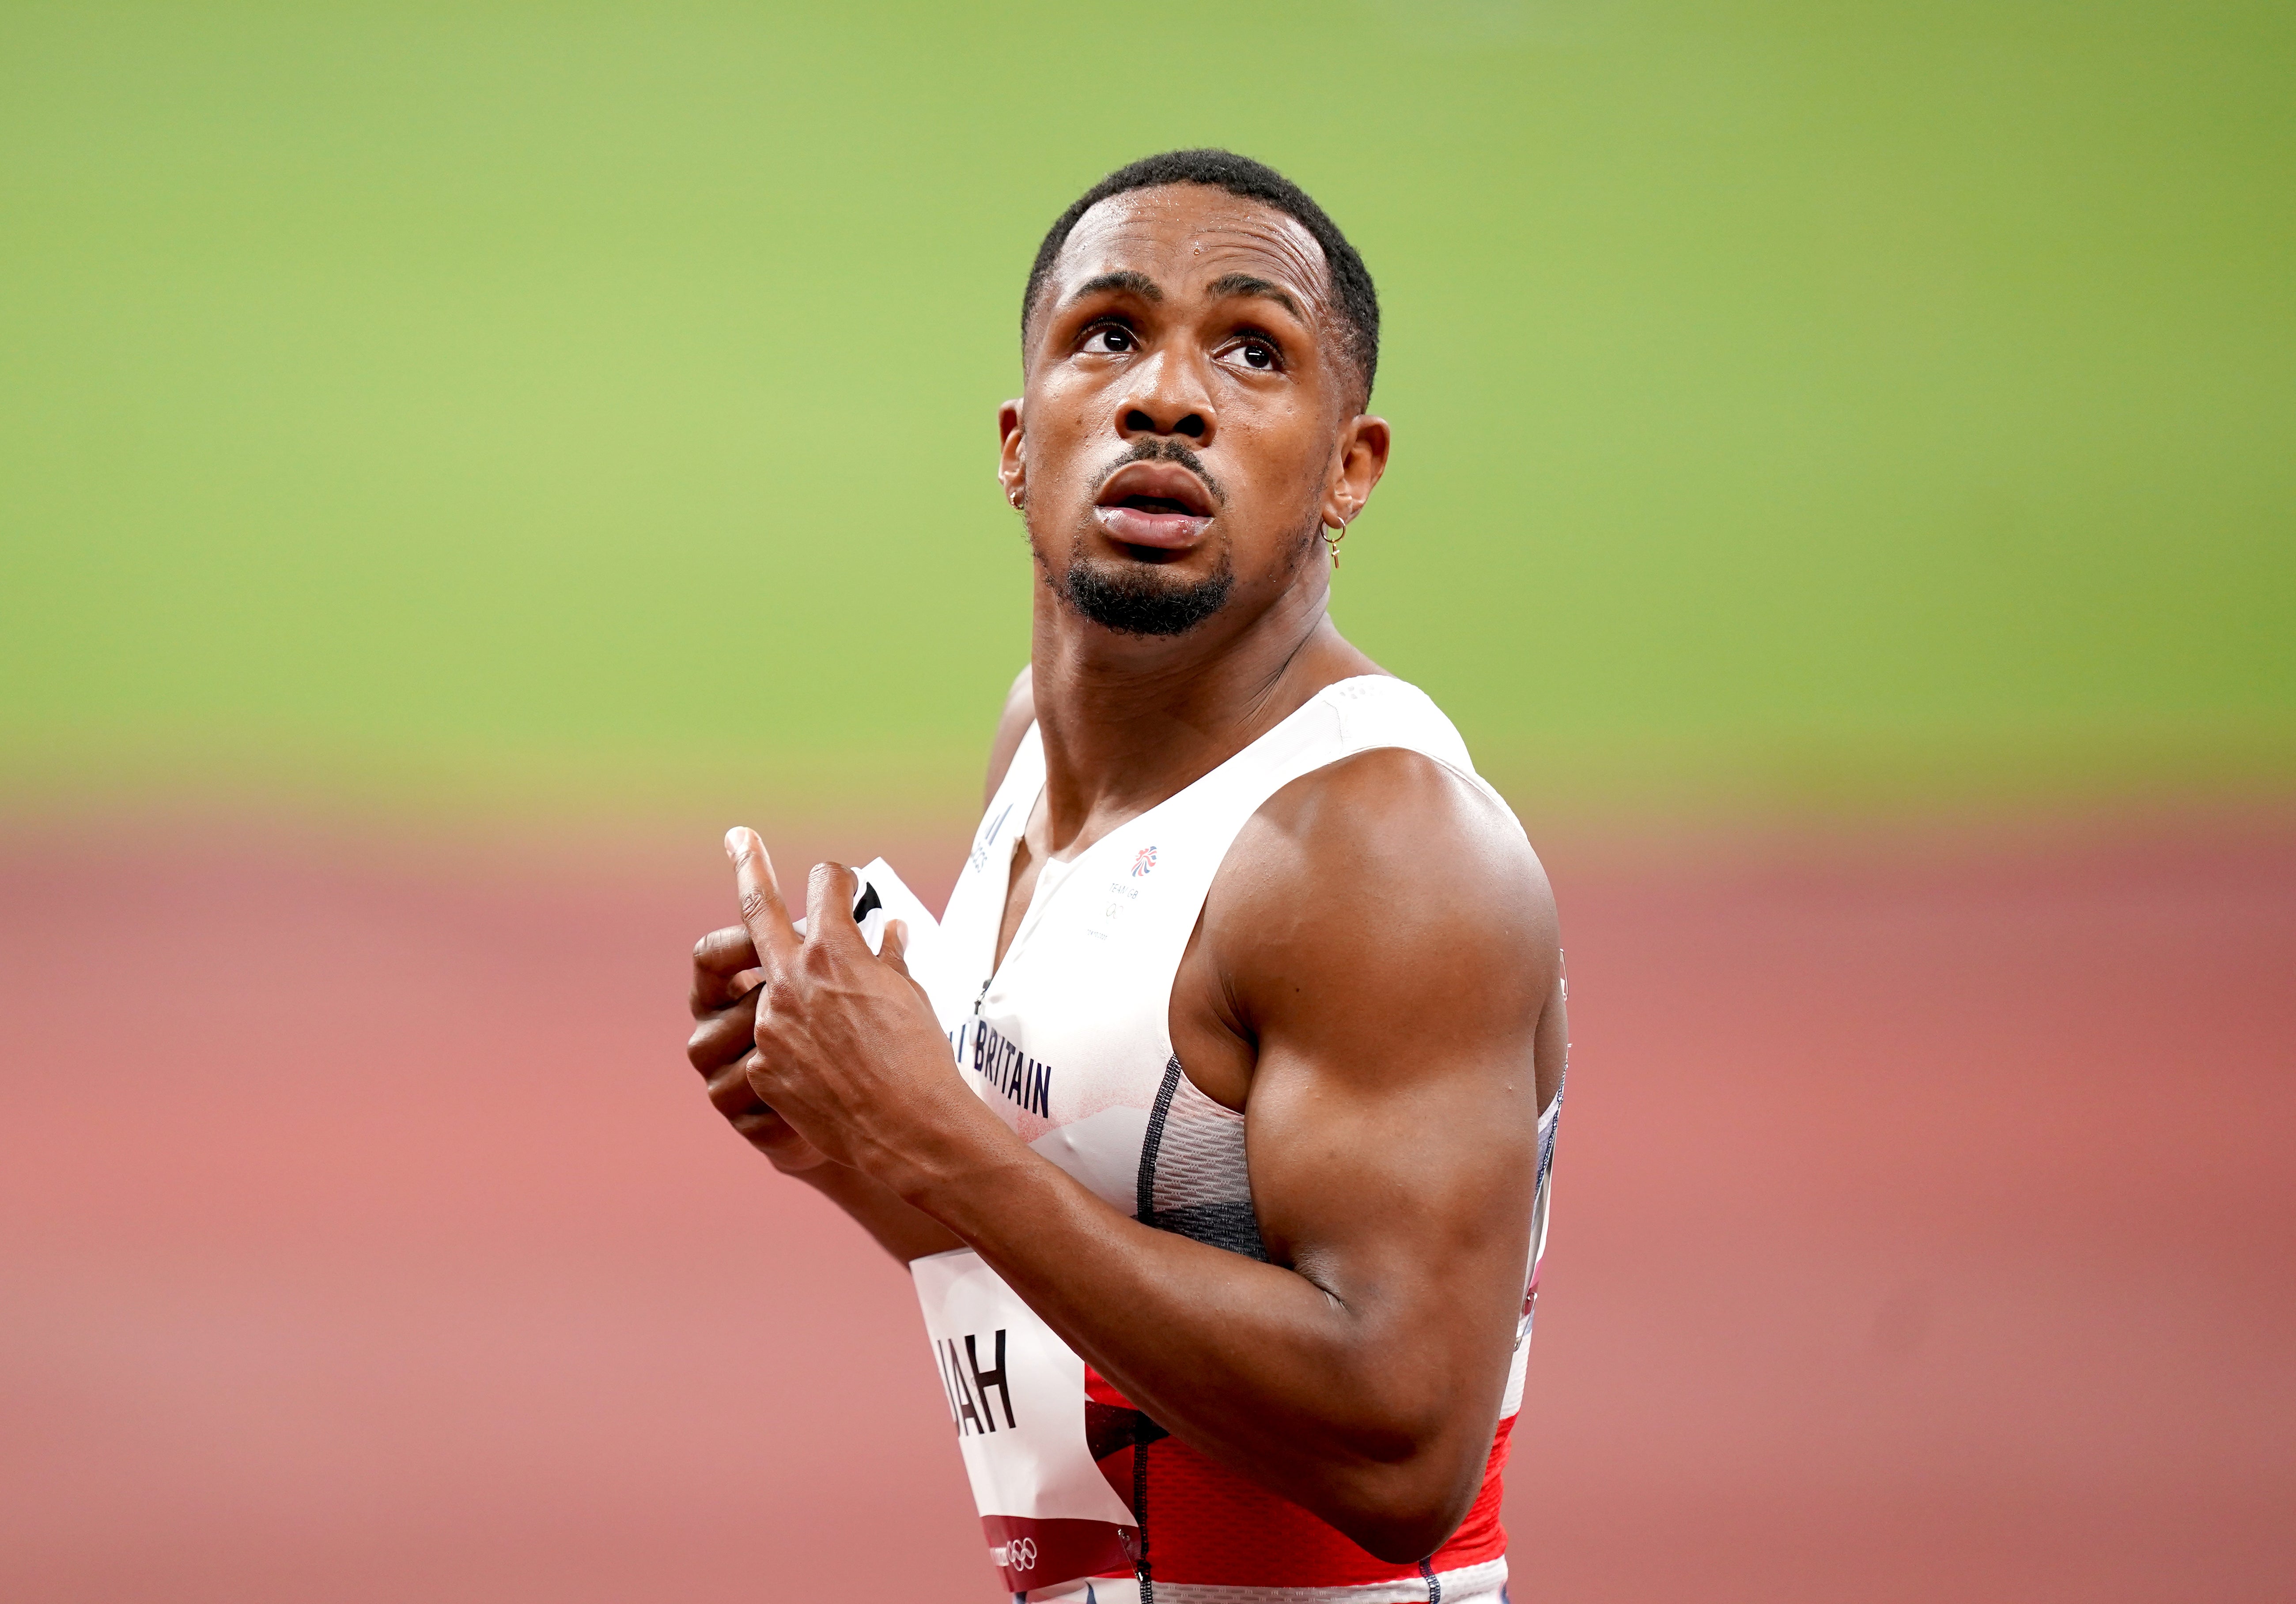 CJ Ujah apologised to his relay teammates over the doping breach